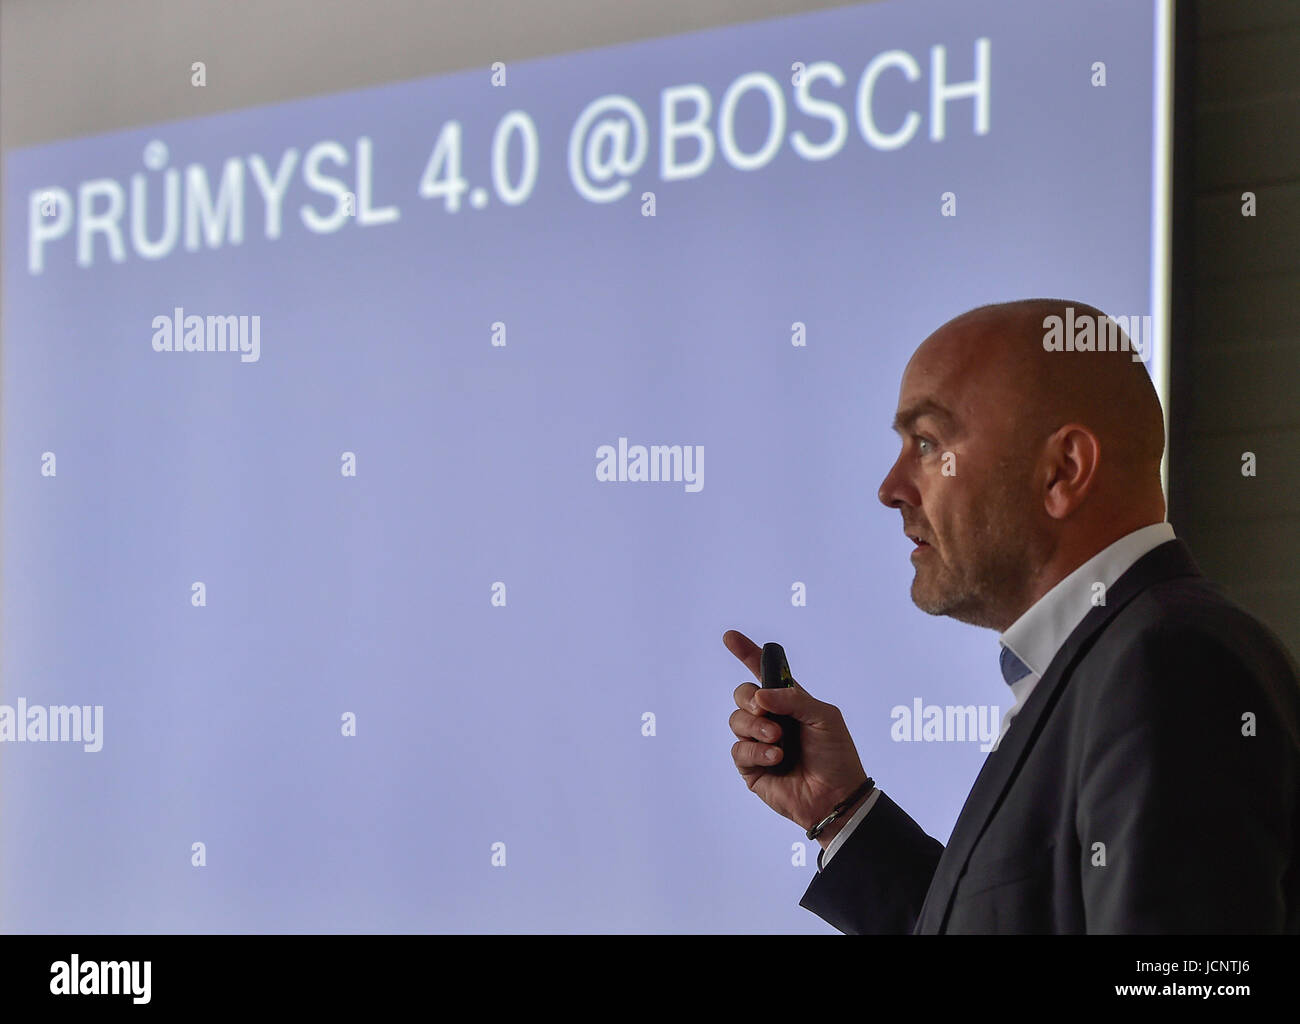 Pavov, Czech Republic. 16th June, 2017. General Manager of Bosch Czech Republic and Slovakia speaks during the presentation a plan to modernize the management of 'Industry 4.0' by Bosch Diesel Jihlava company in Pavov, Czech Republic, on June 16, 2017. Company introduced an automatic laser-controlled vehicle with autopilot directly in production. Credit: Lubos Pavlicek/CTK Photo/Alamy Live News Stock Photo